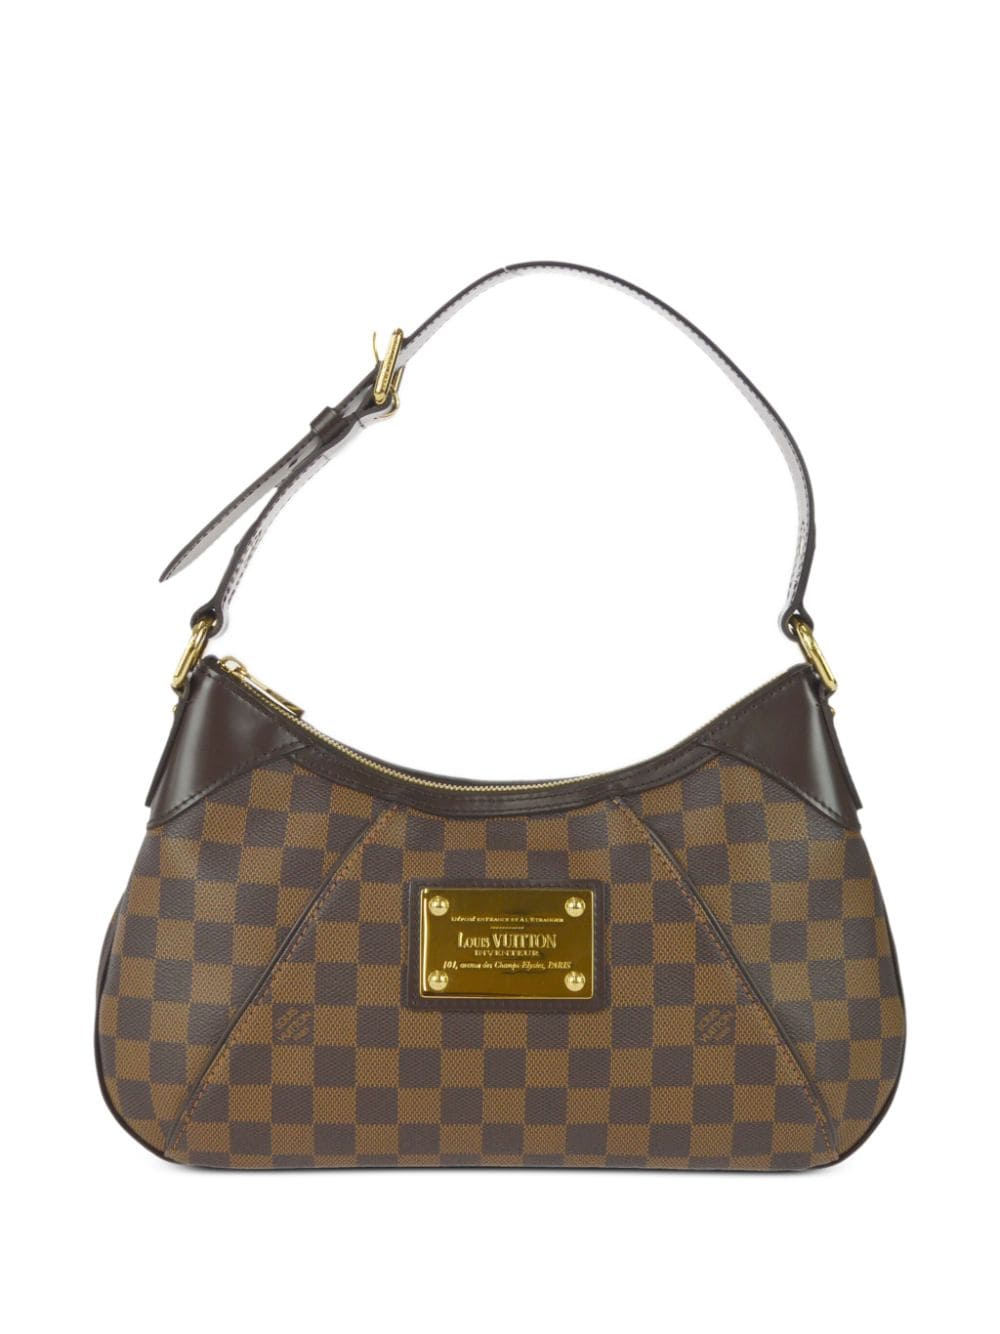 Pre-owned Louis Vuitton 2020s Sac Plat Pm Two-way Bag In Brown